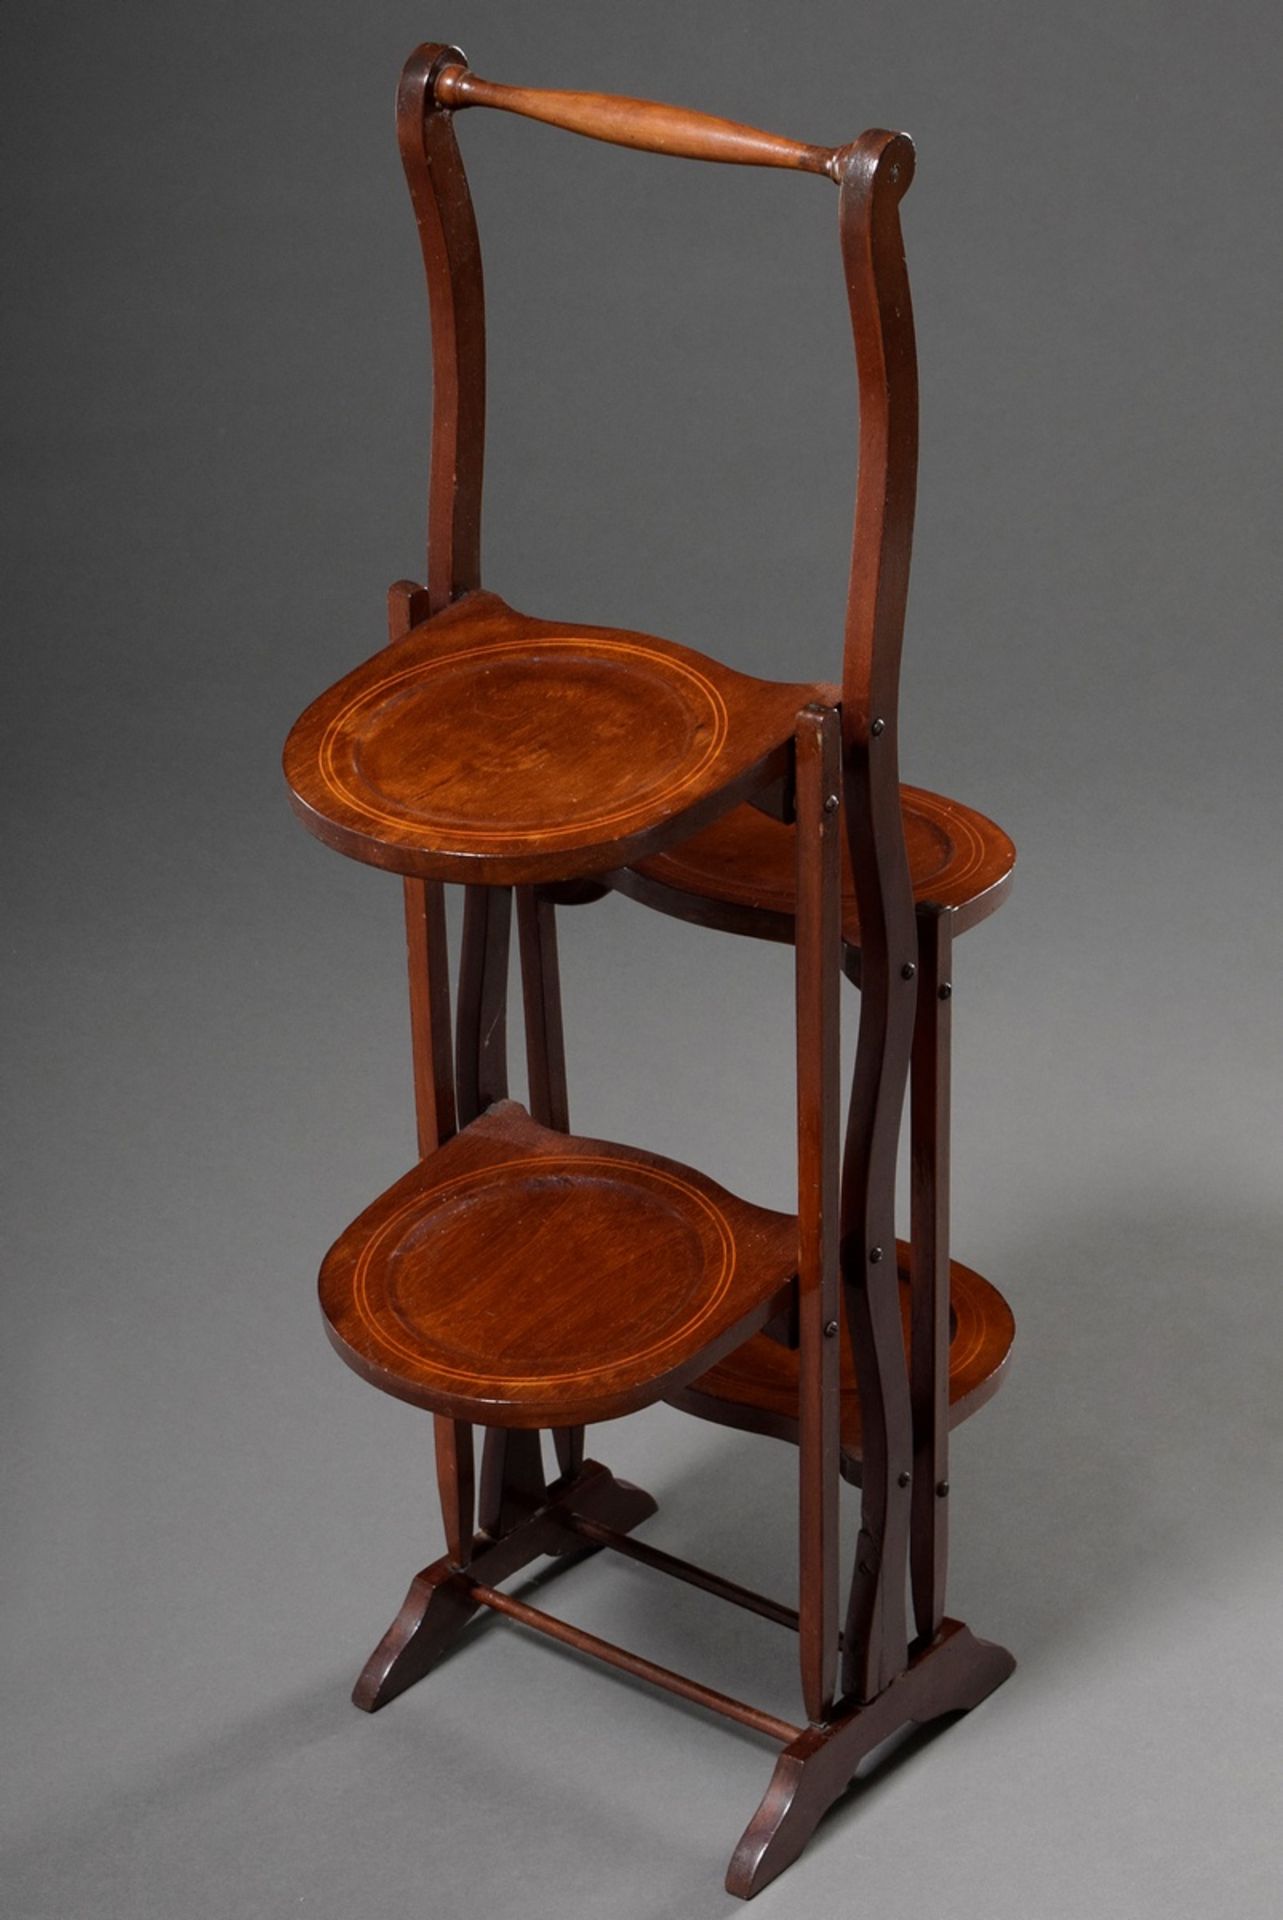 Mahogany cakestand with ribbon inlays, turned frame and two folding plate stands on each side, c. 1